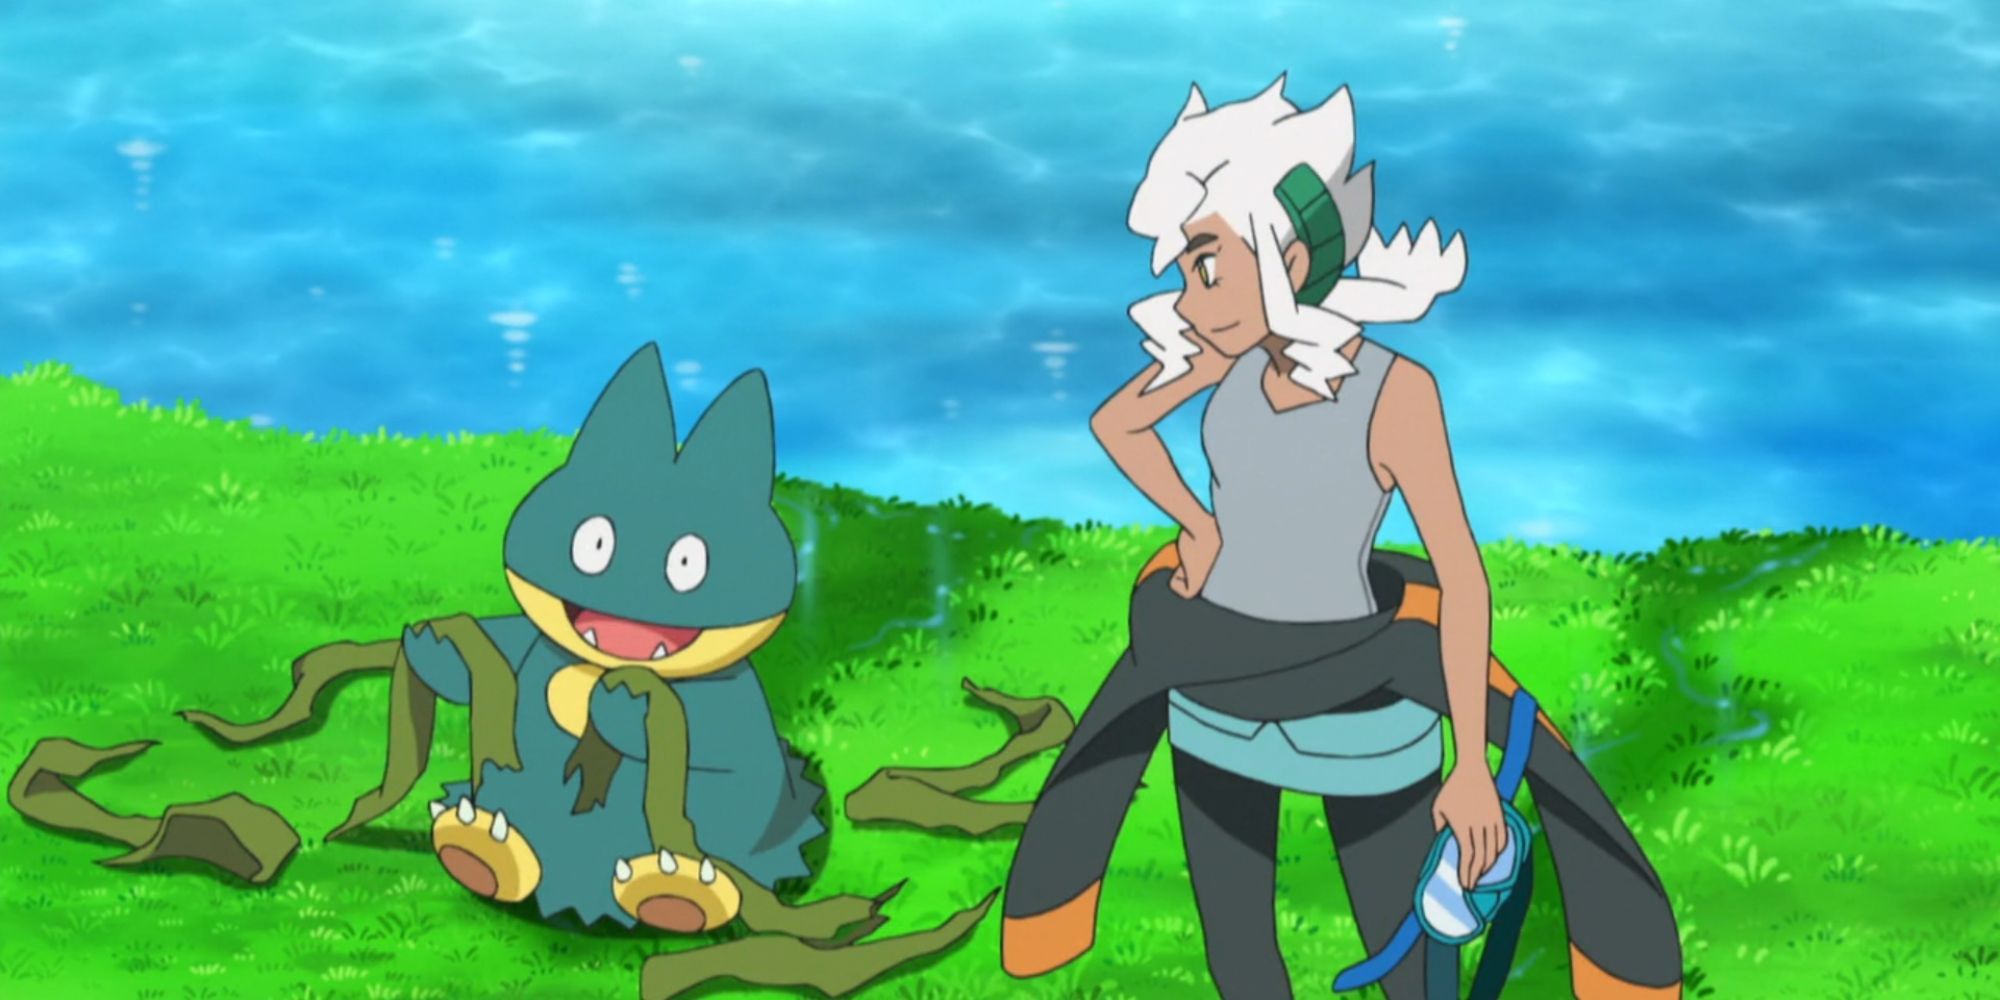 Munchlax plays with some seaweed beside Professor Burnet